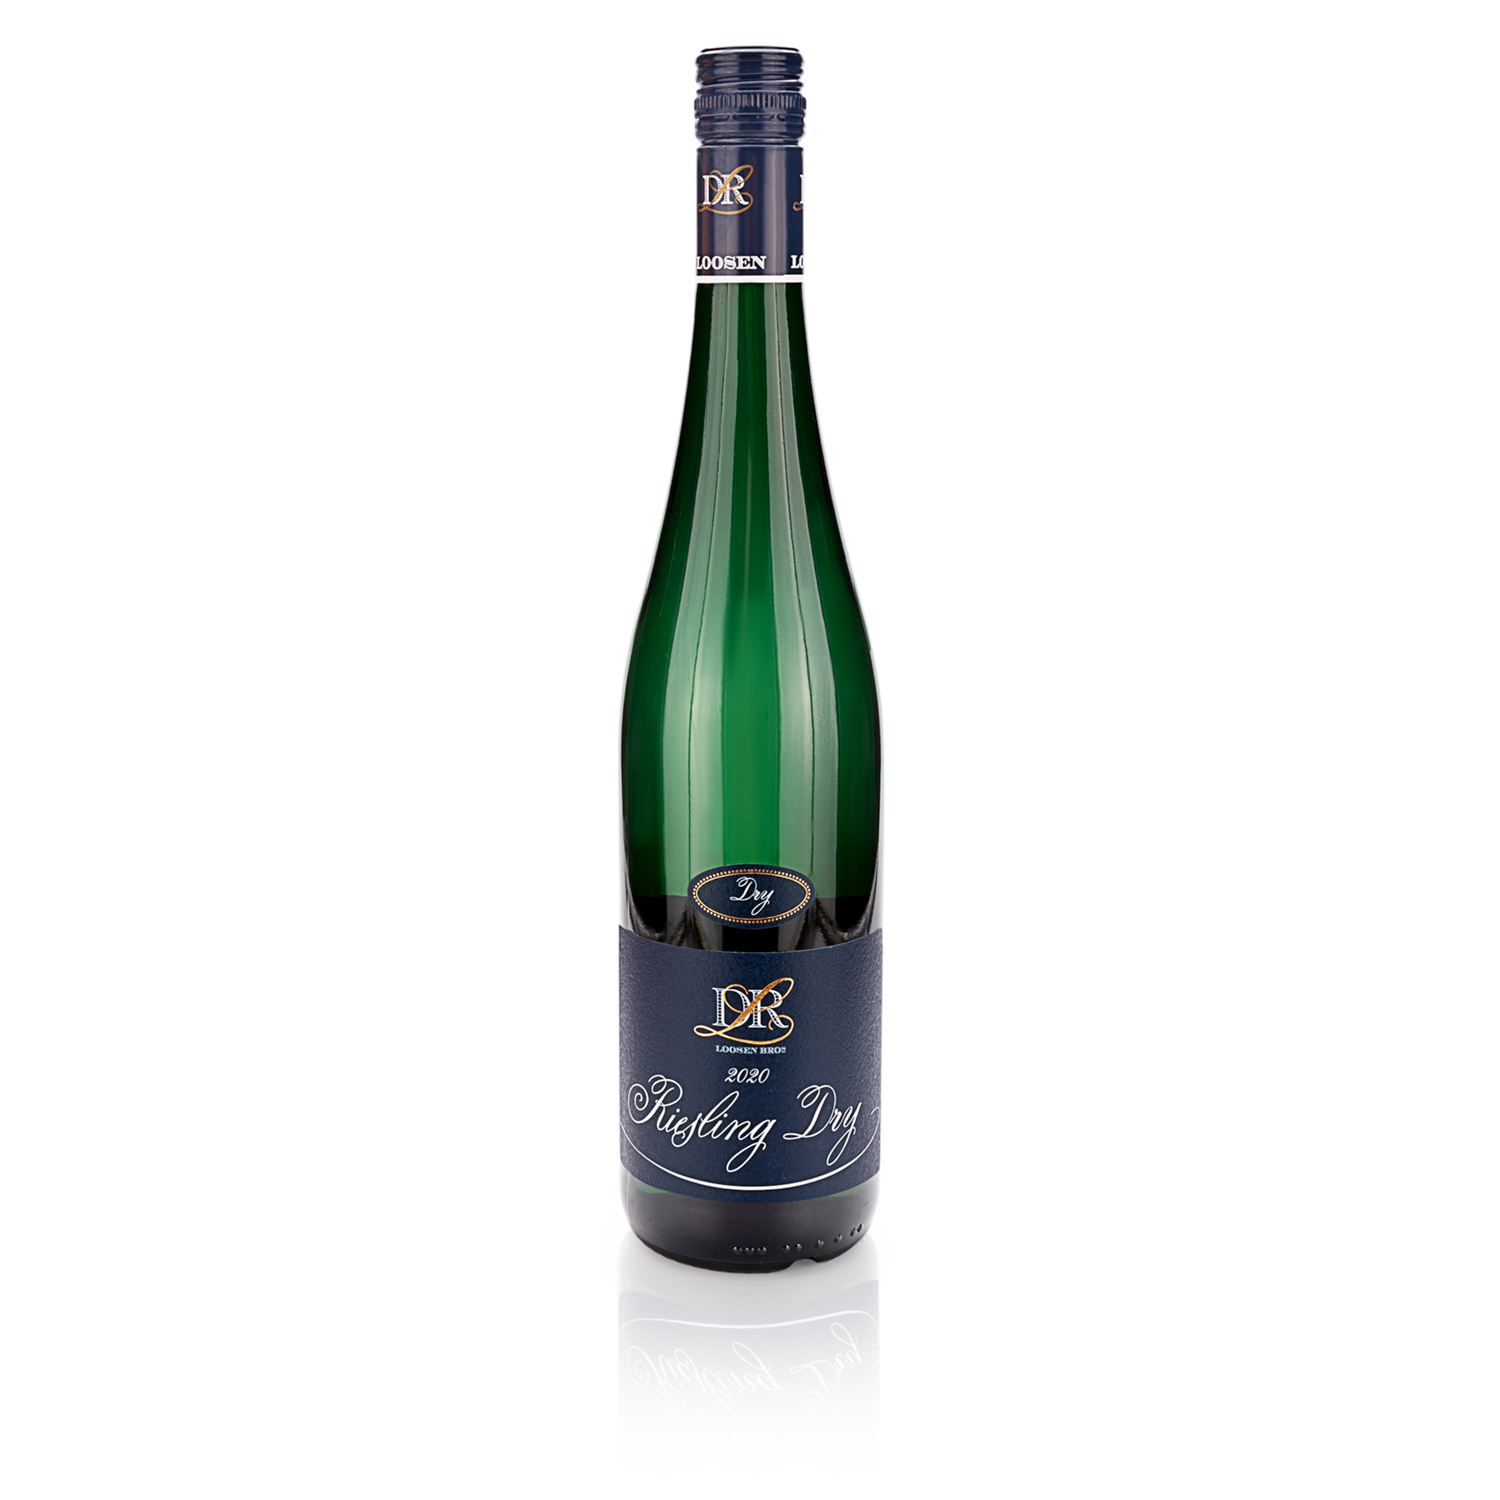 Dr. Loosen - Riesling Dry